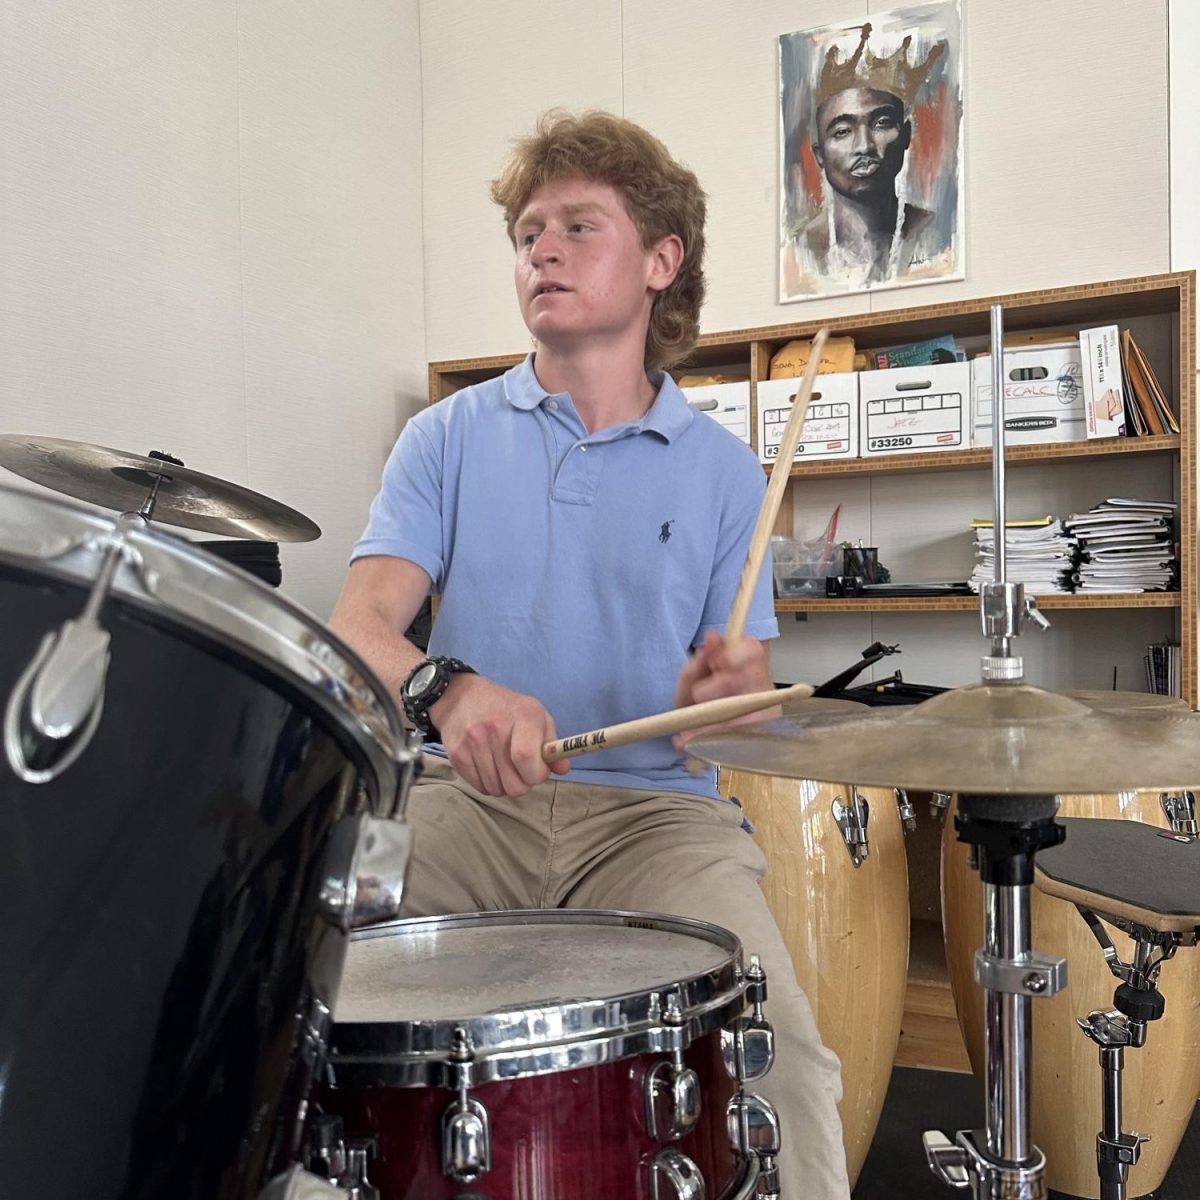 Cyrus Allen ‘25, plays the drums. Allen and the band have been building their repertoire for their first performance.